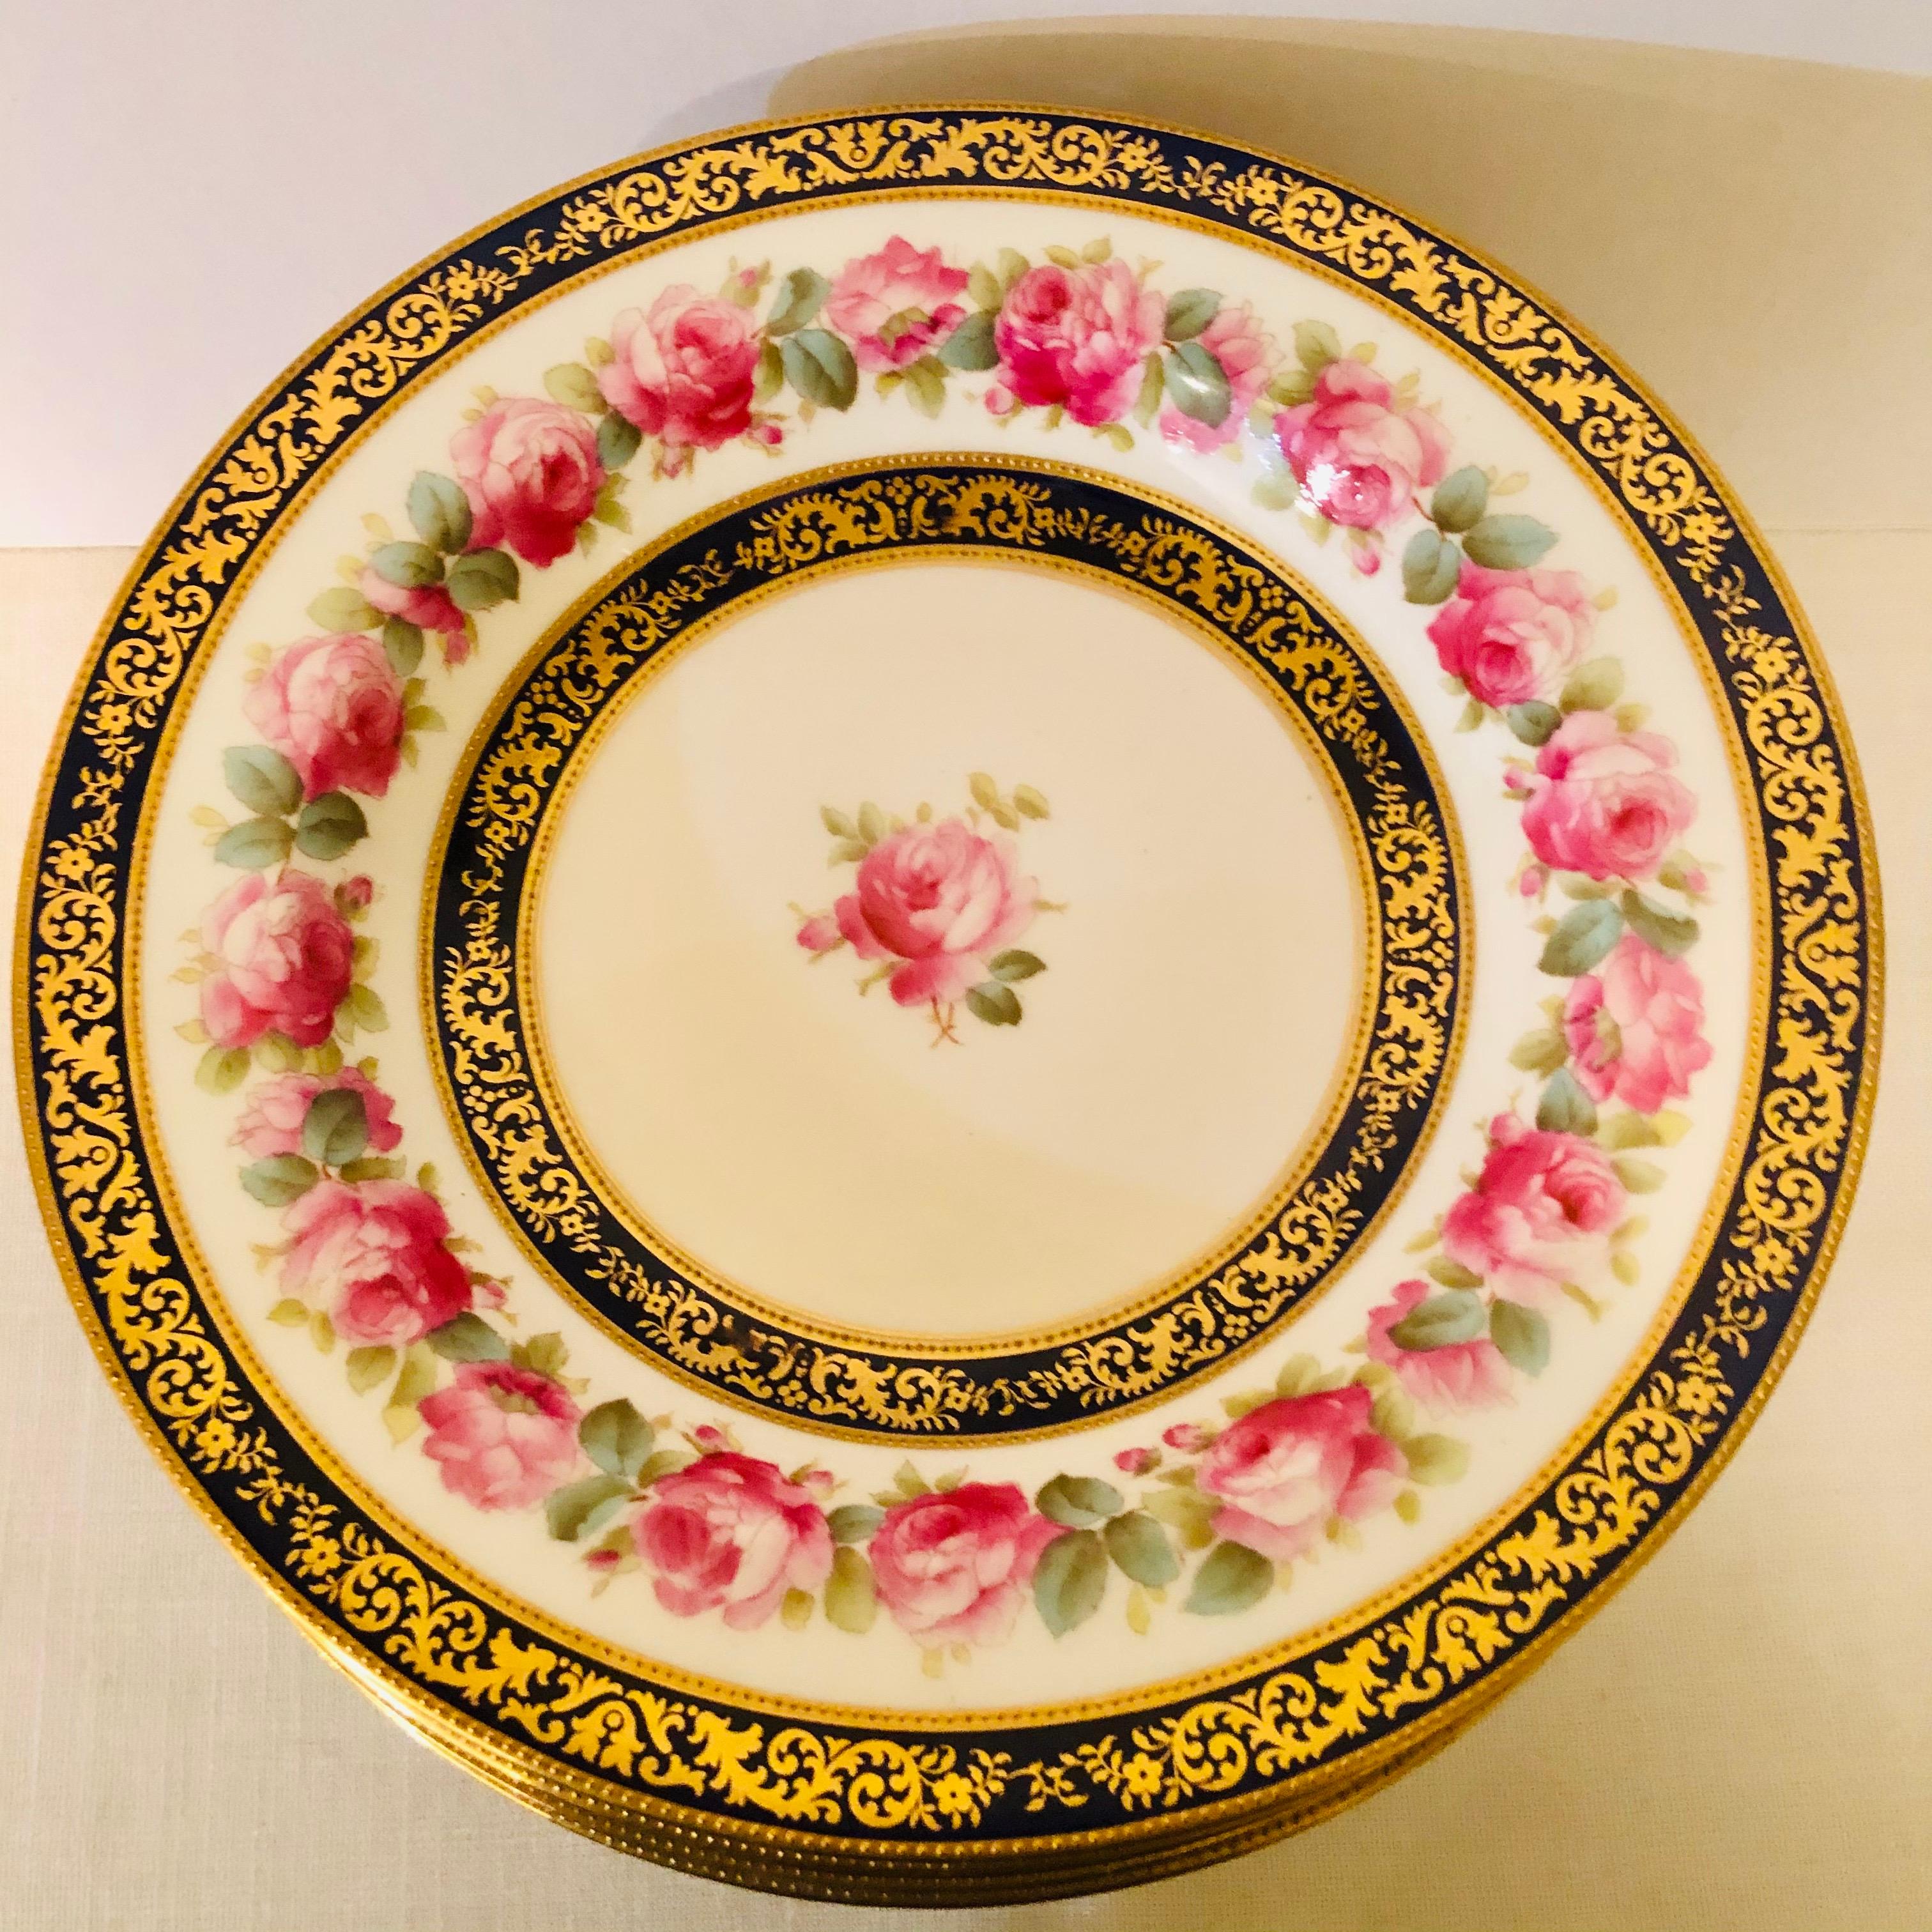 This is a stunning set of twelve Cauldon English wide rim soup bowls. They are decorated with a central pink rose with a ring of beautiful pink roses on their inner border. The central rose and the ring of roses are each surrounded by a cobalt